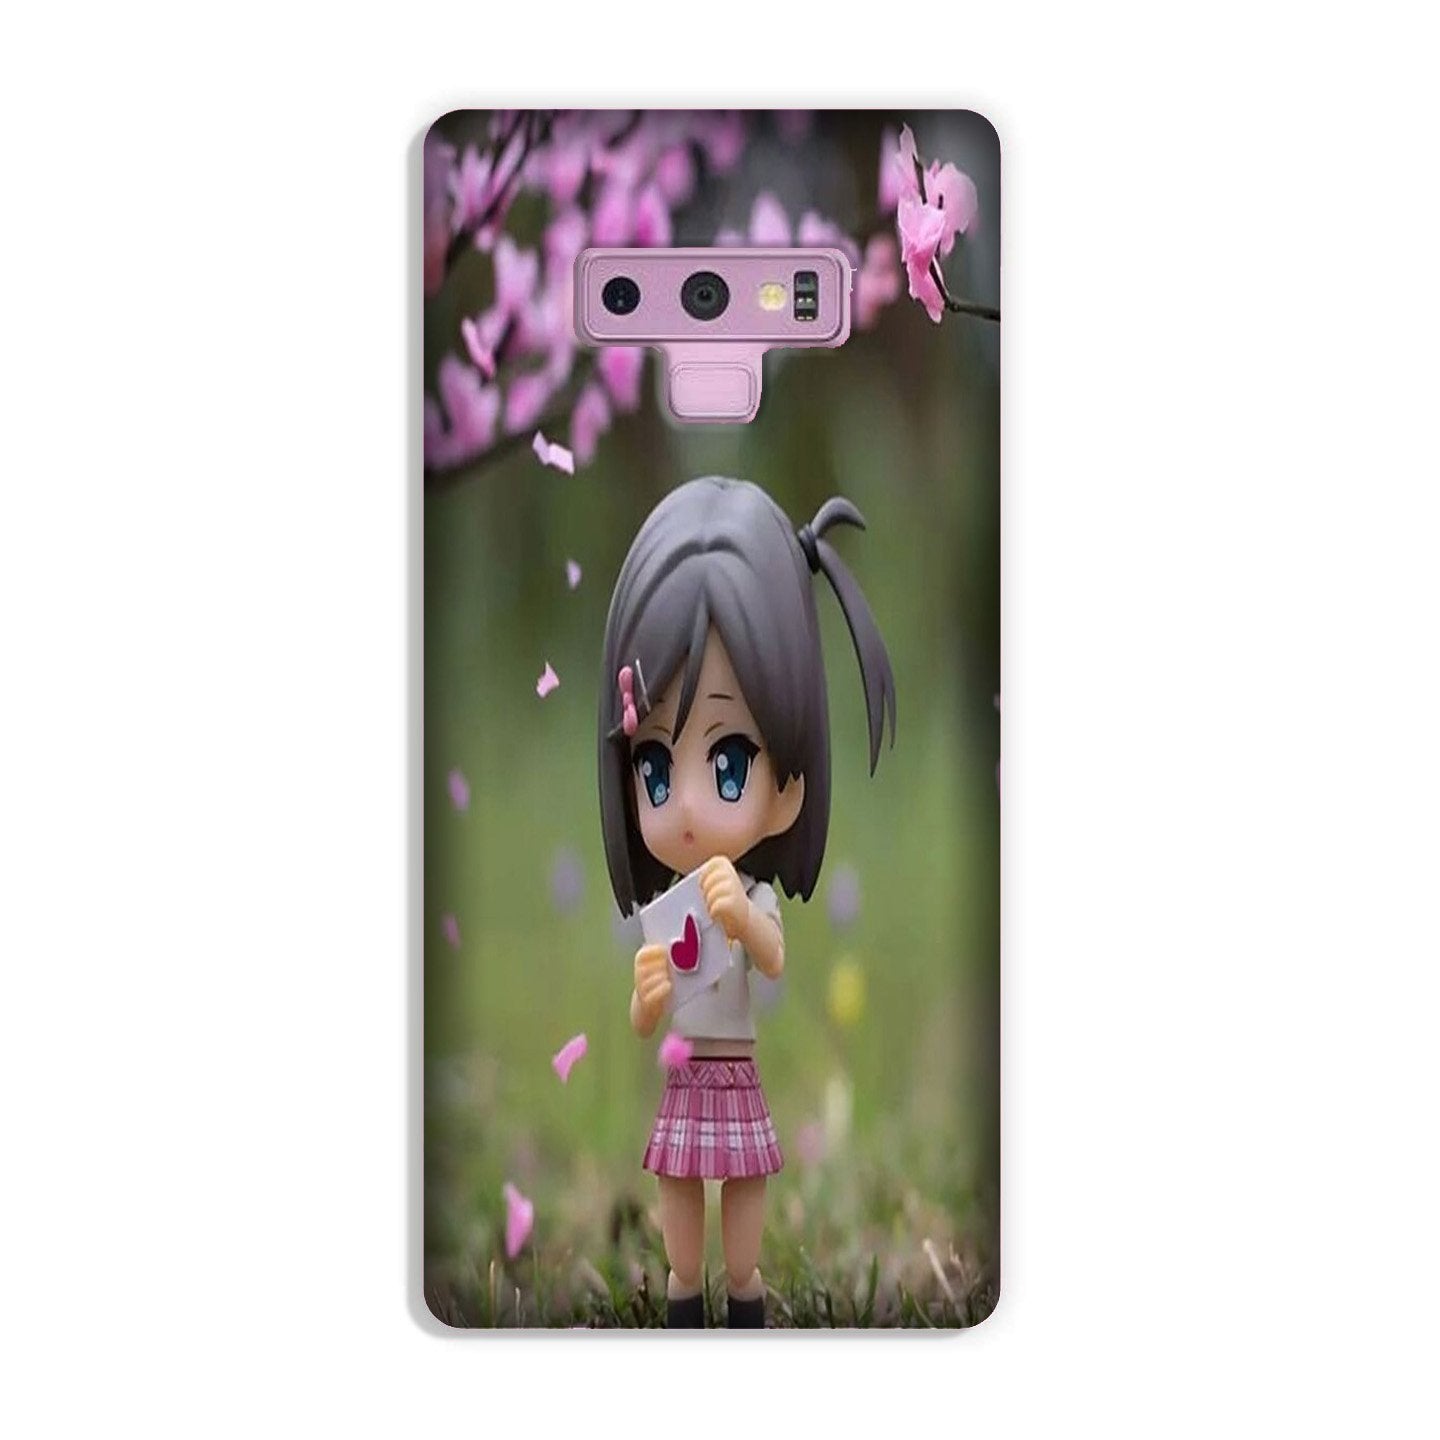 Cute Girl Case for Galaxy Note 9